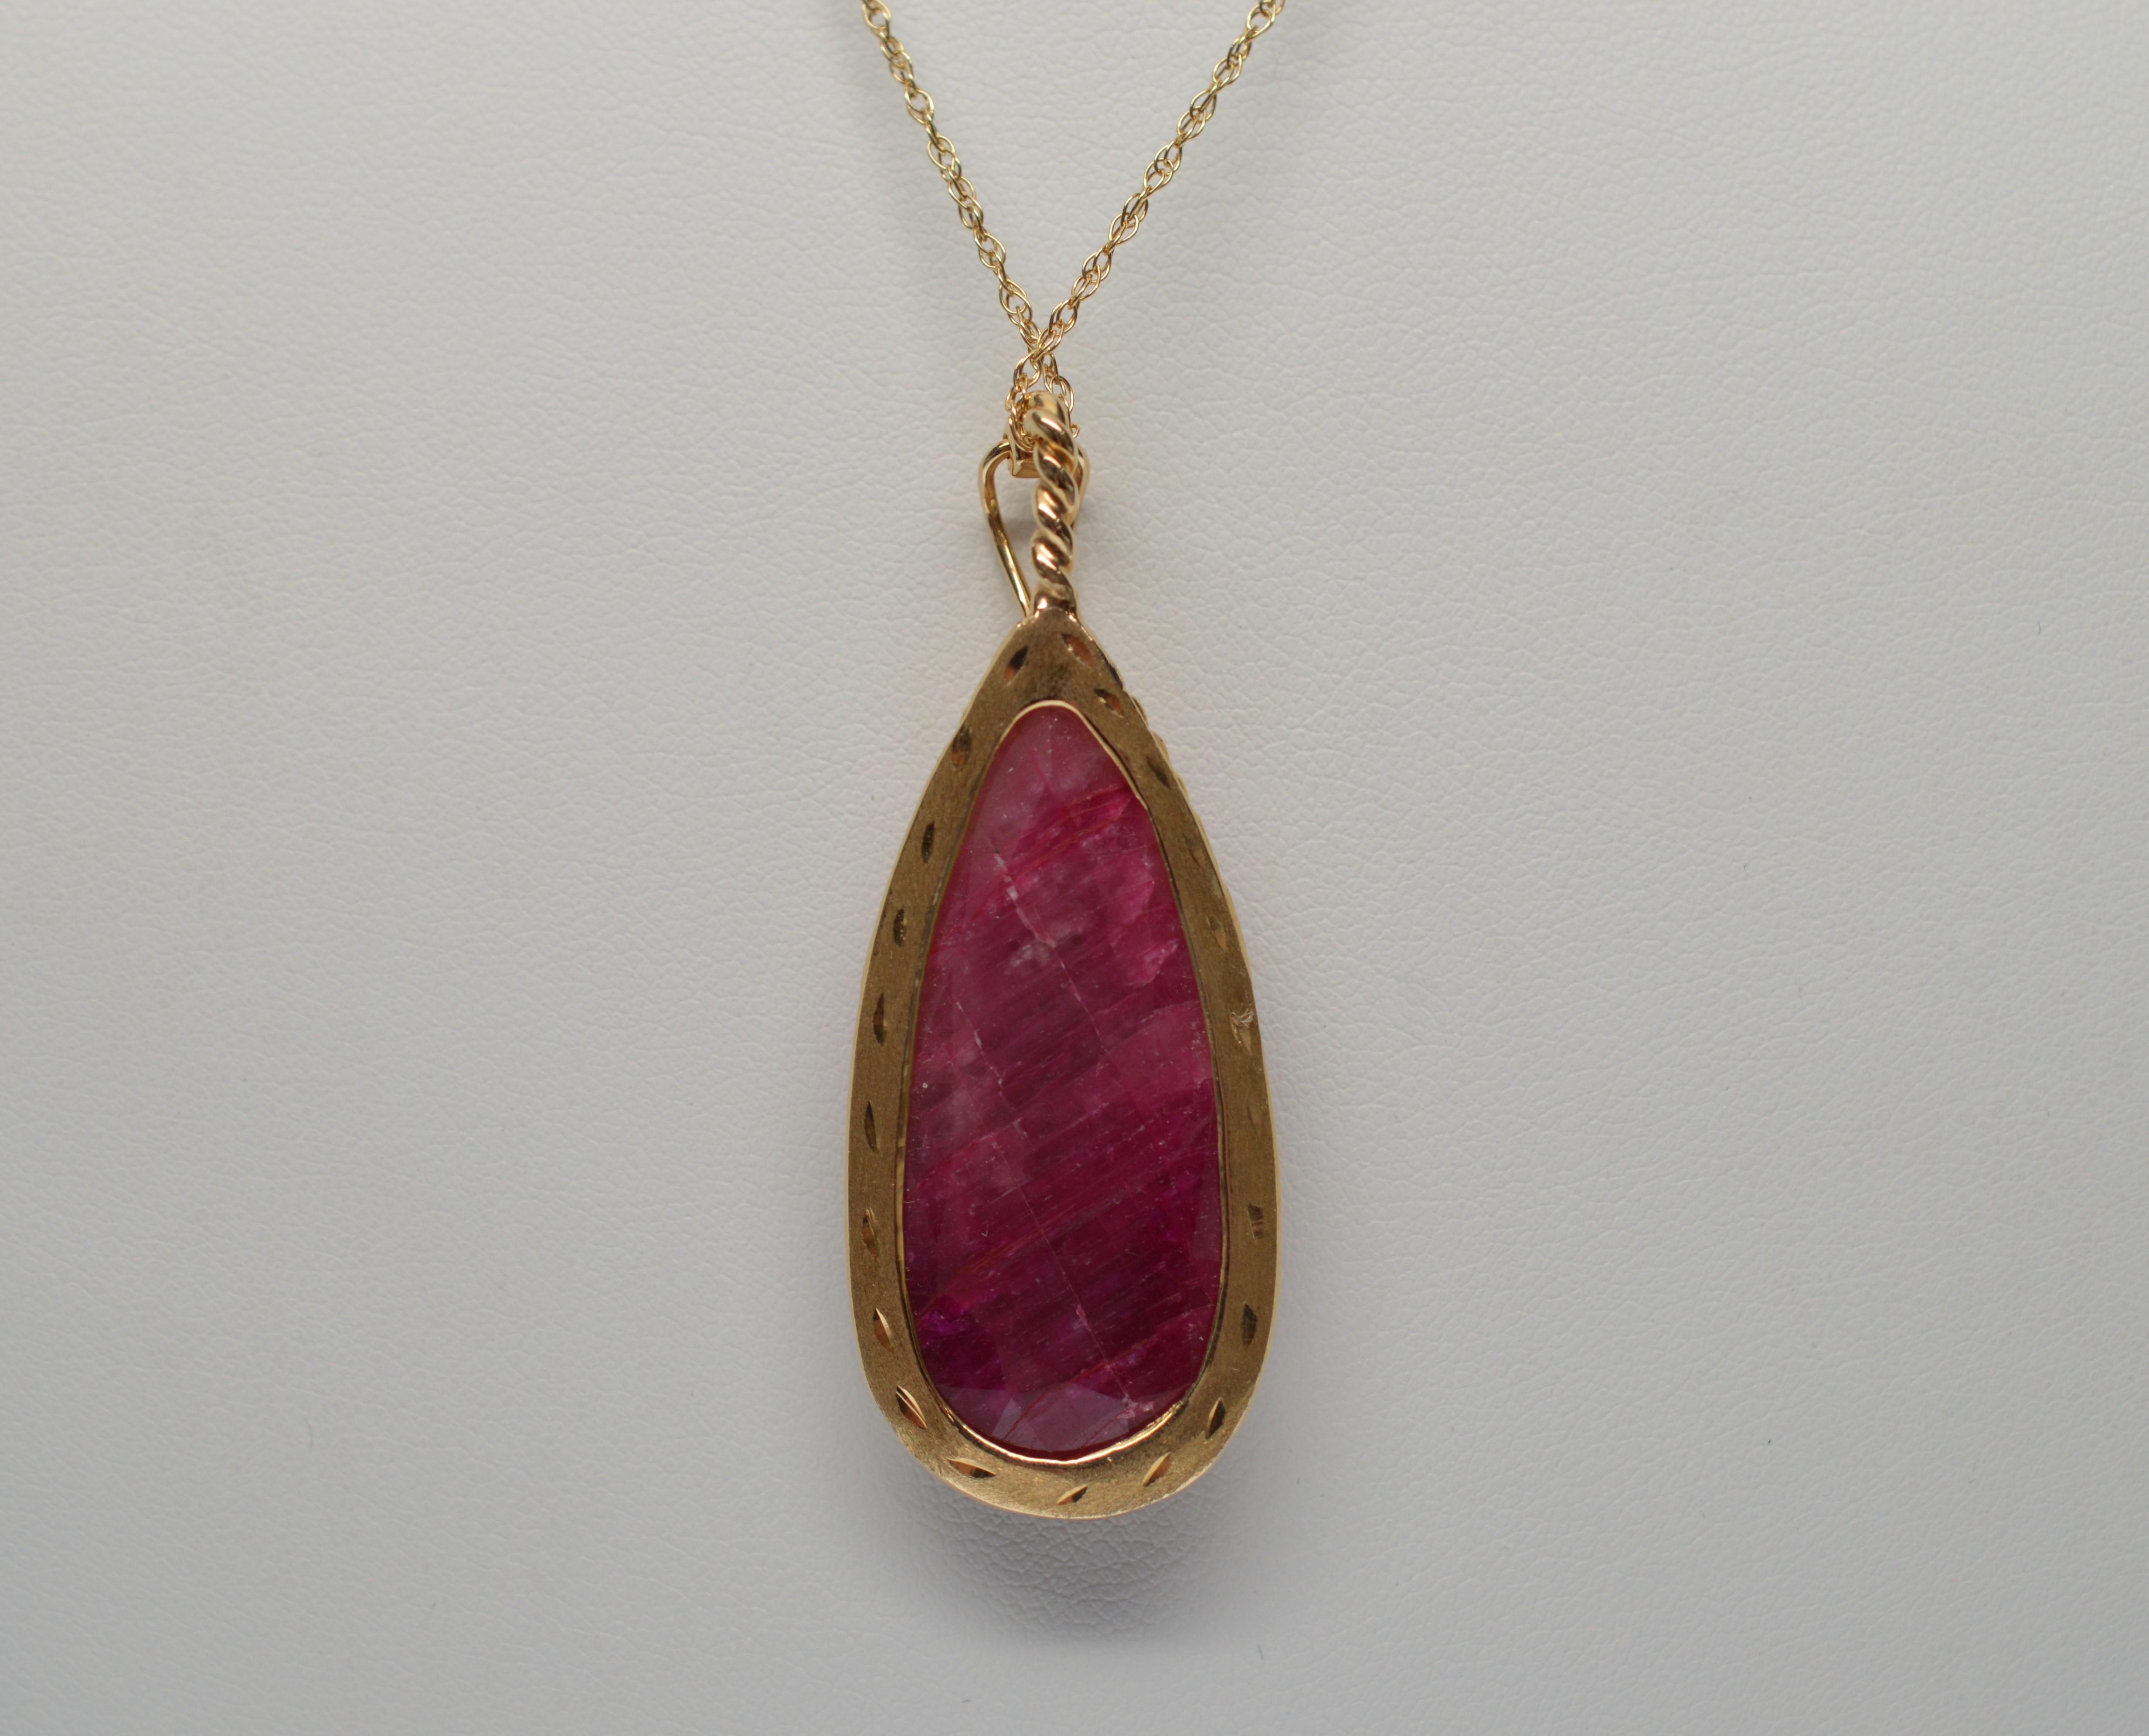 Women's 60 Carat Natural Ruby Pendant on 14K Yellow Gold Necklace 